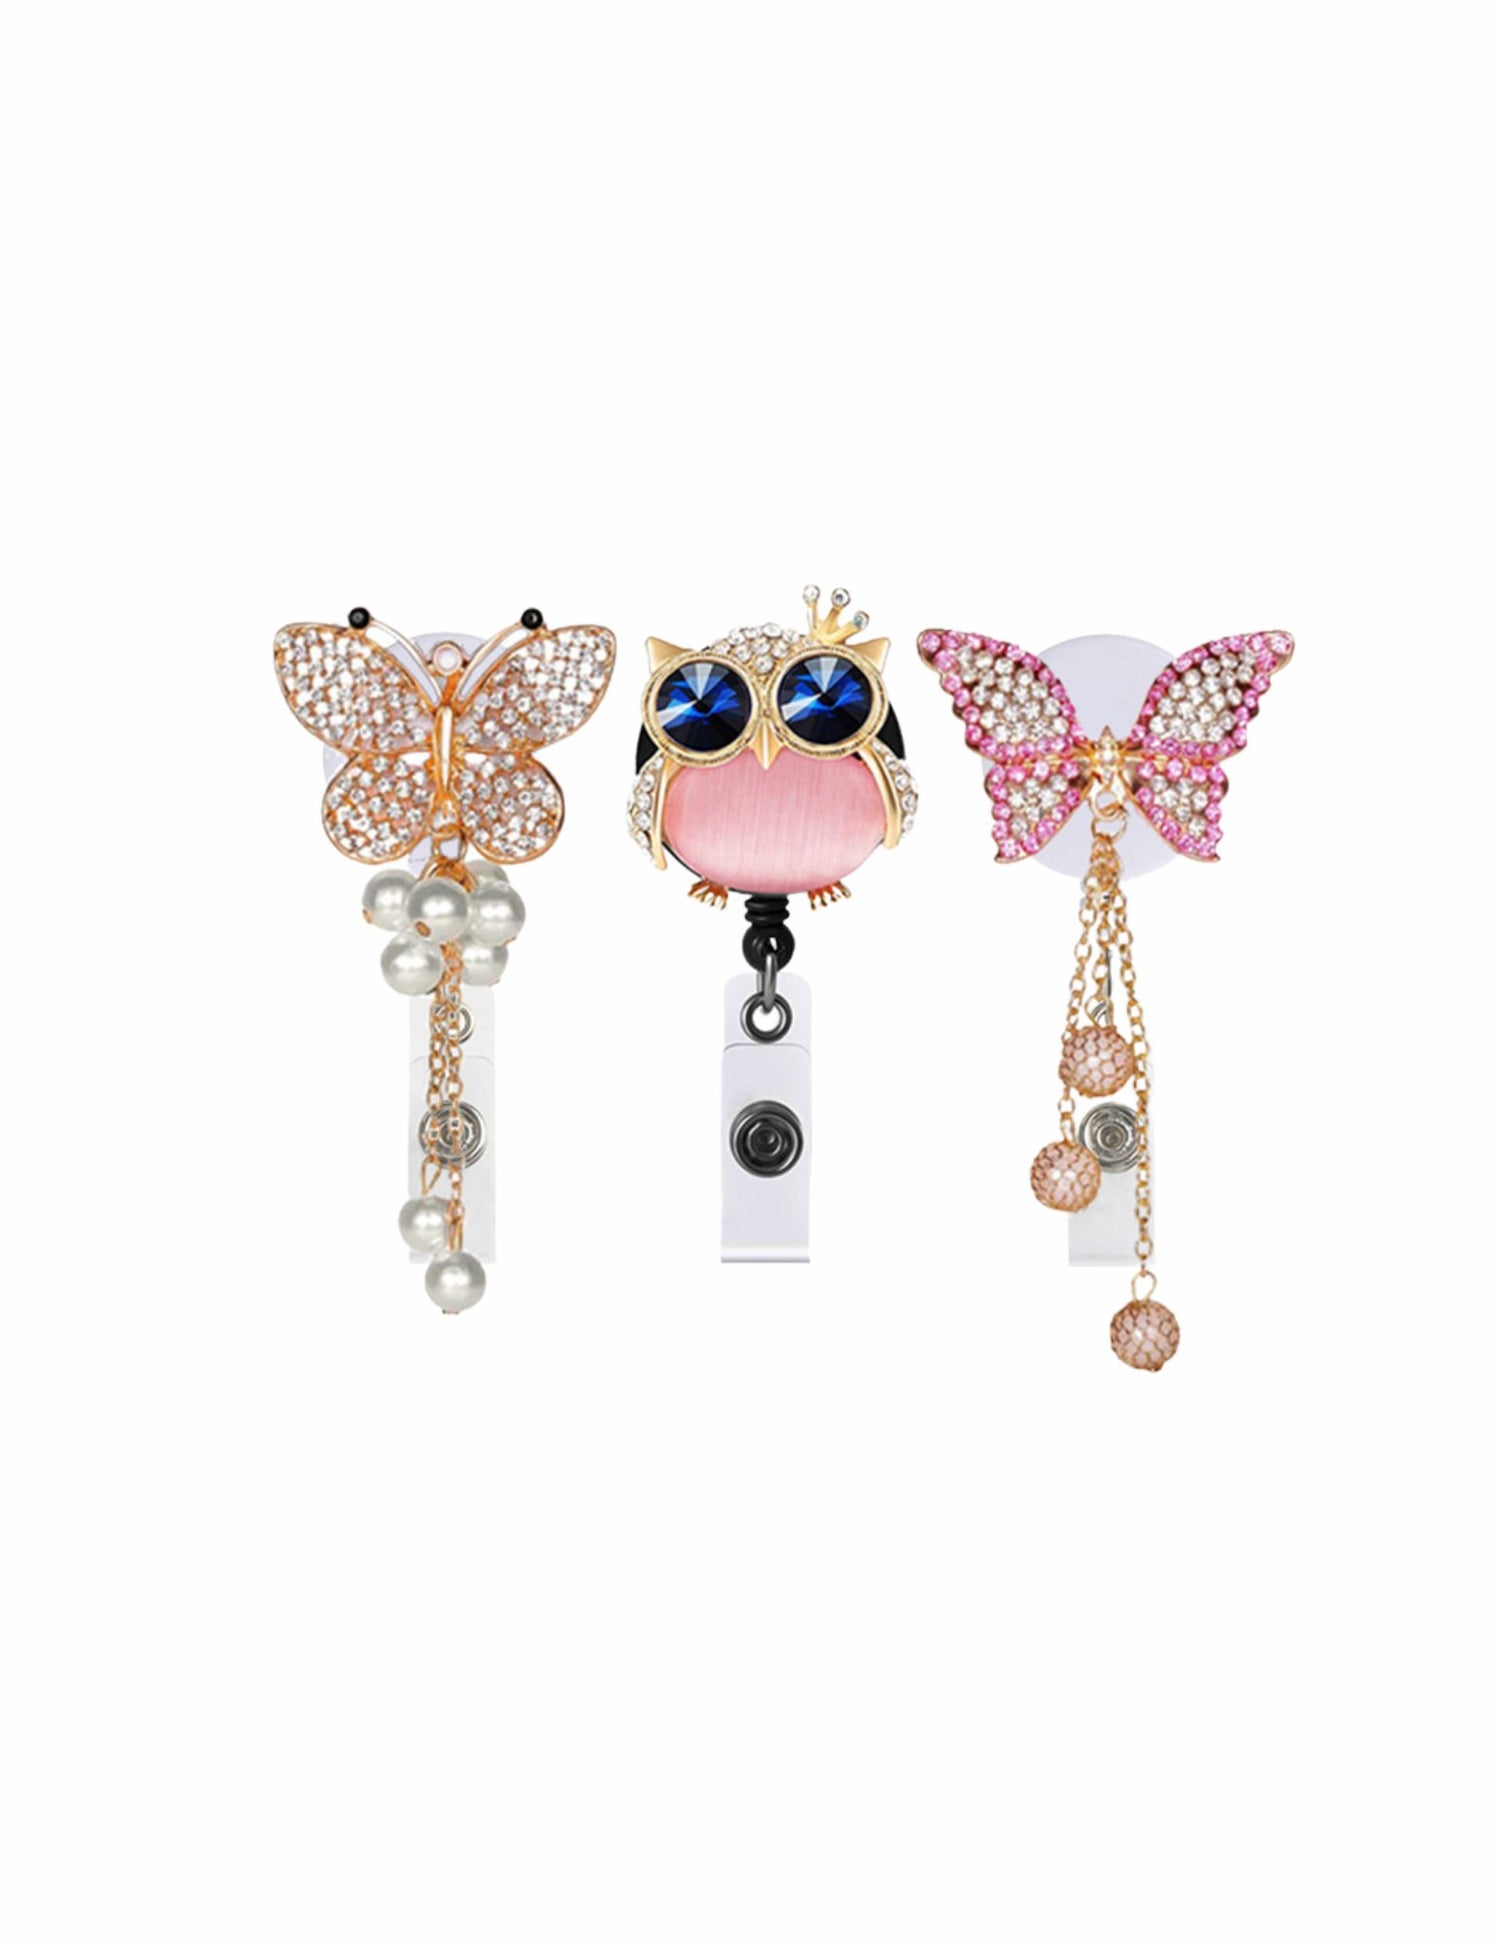 Crystal Owl and Pink & Gold Butterfly